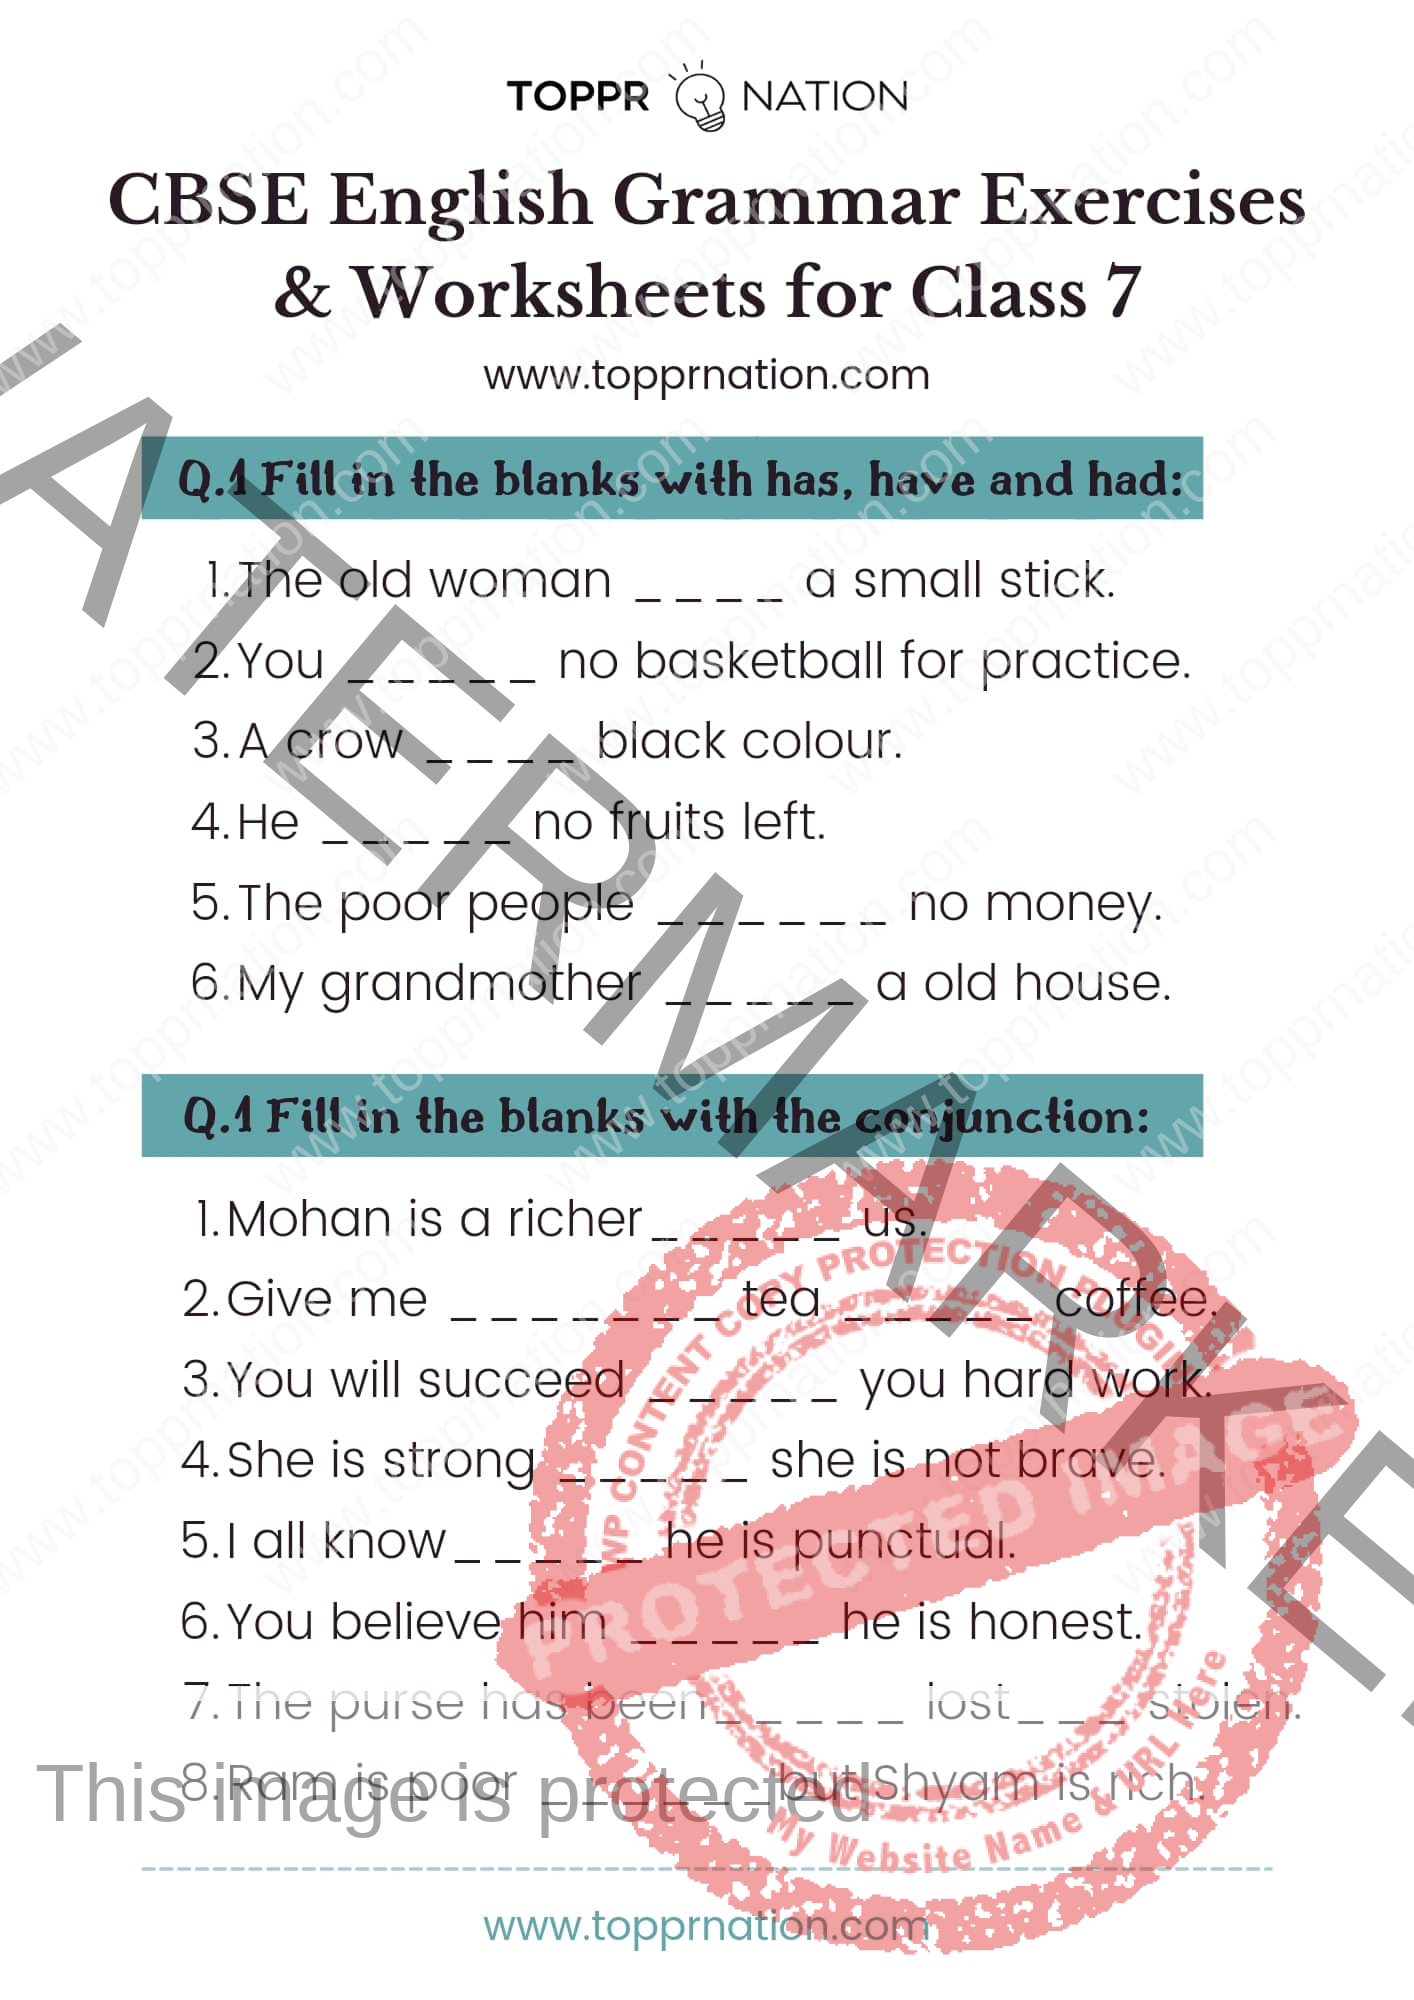 cbse-english-grammar-exercises-for-class-7-english-worksheets